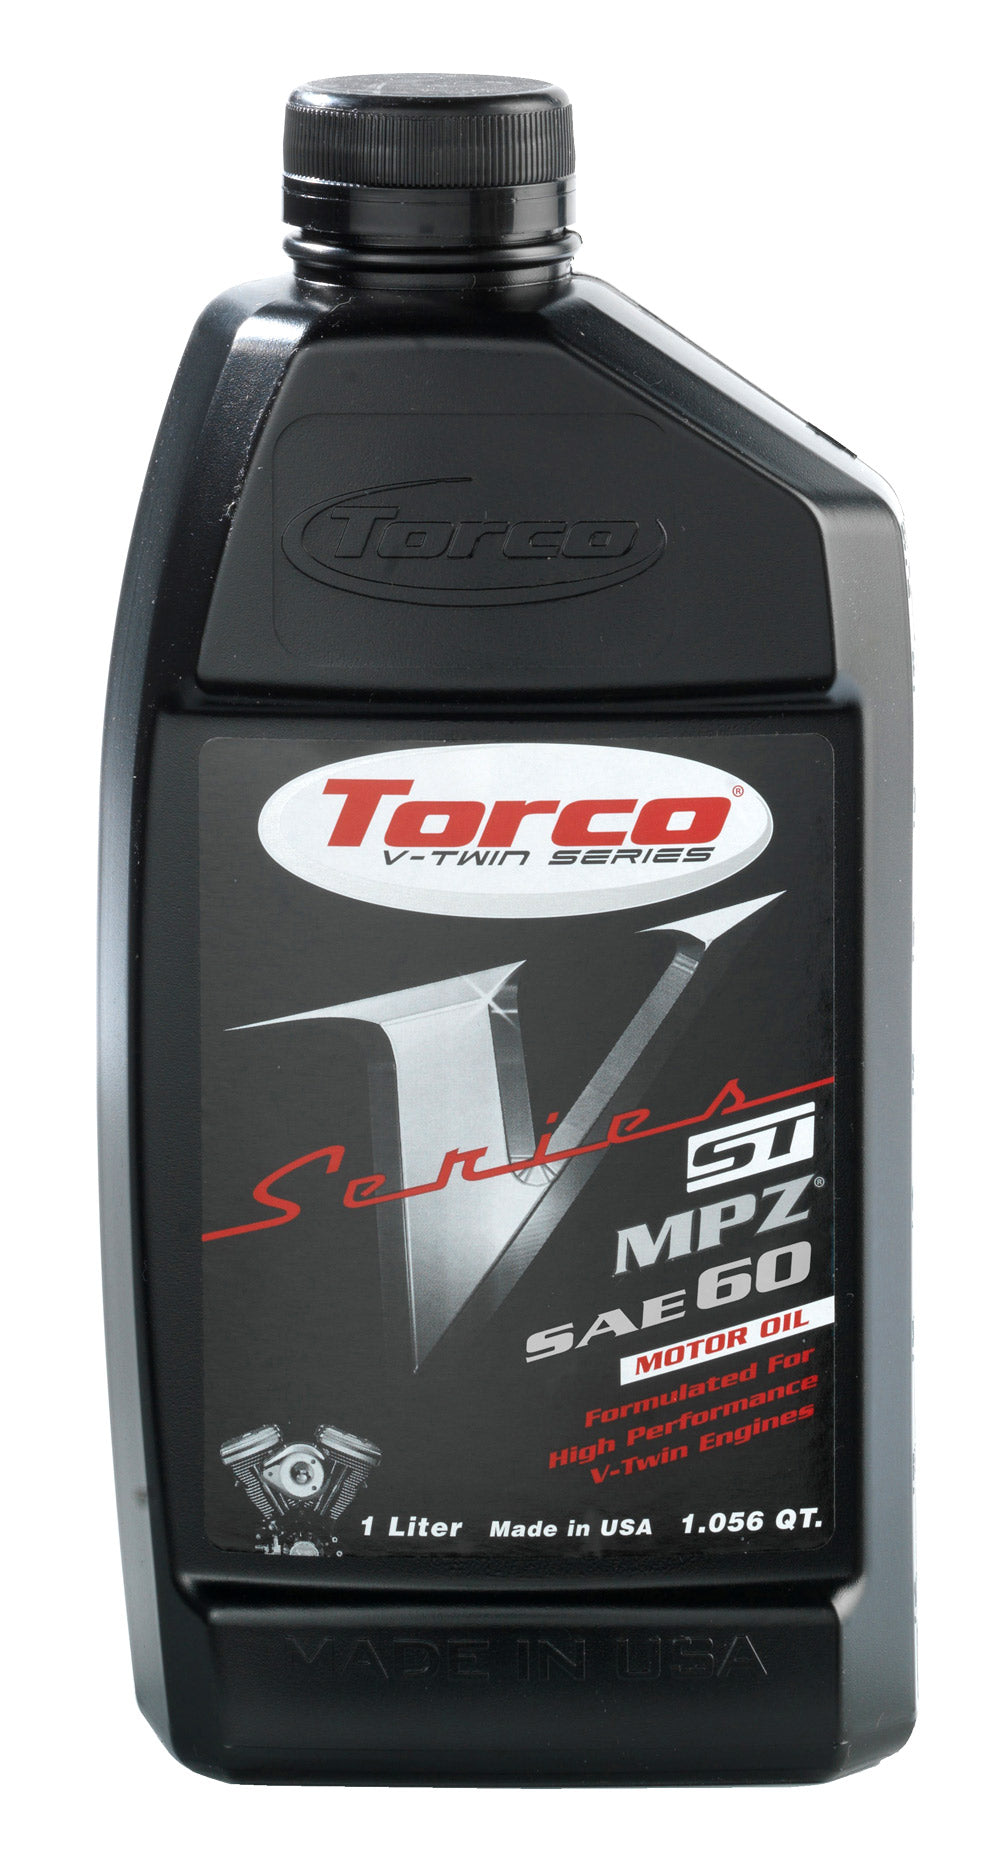 V-Series "ST" Motorcycle Oil 60 weight